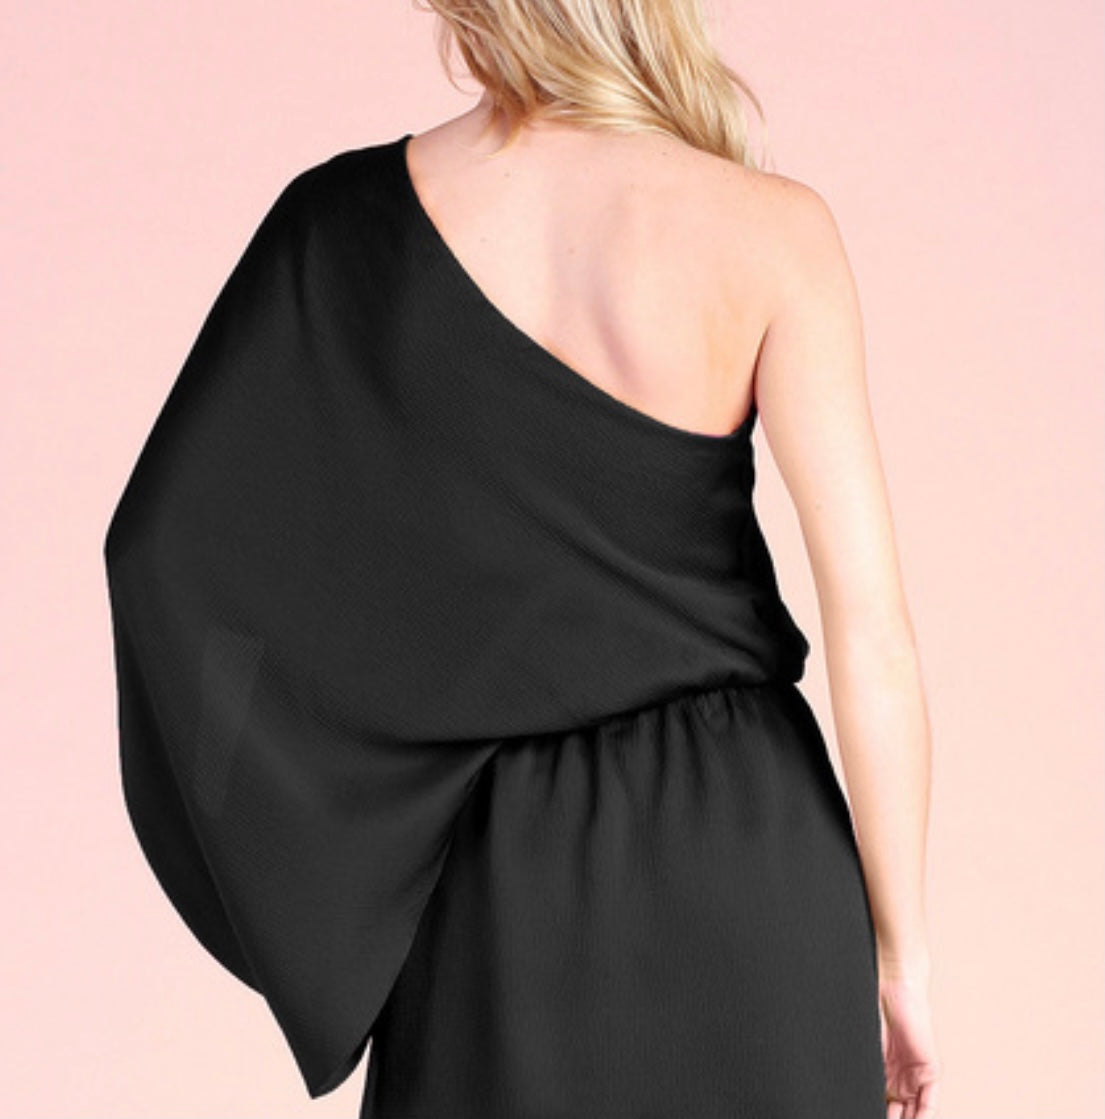 Black Solid Slouchy One Shoulder Maxi